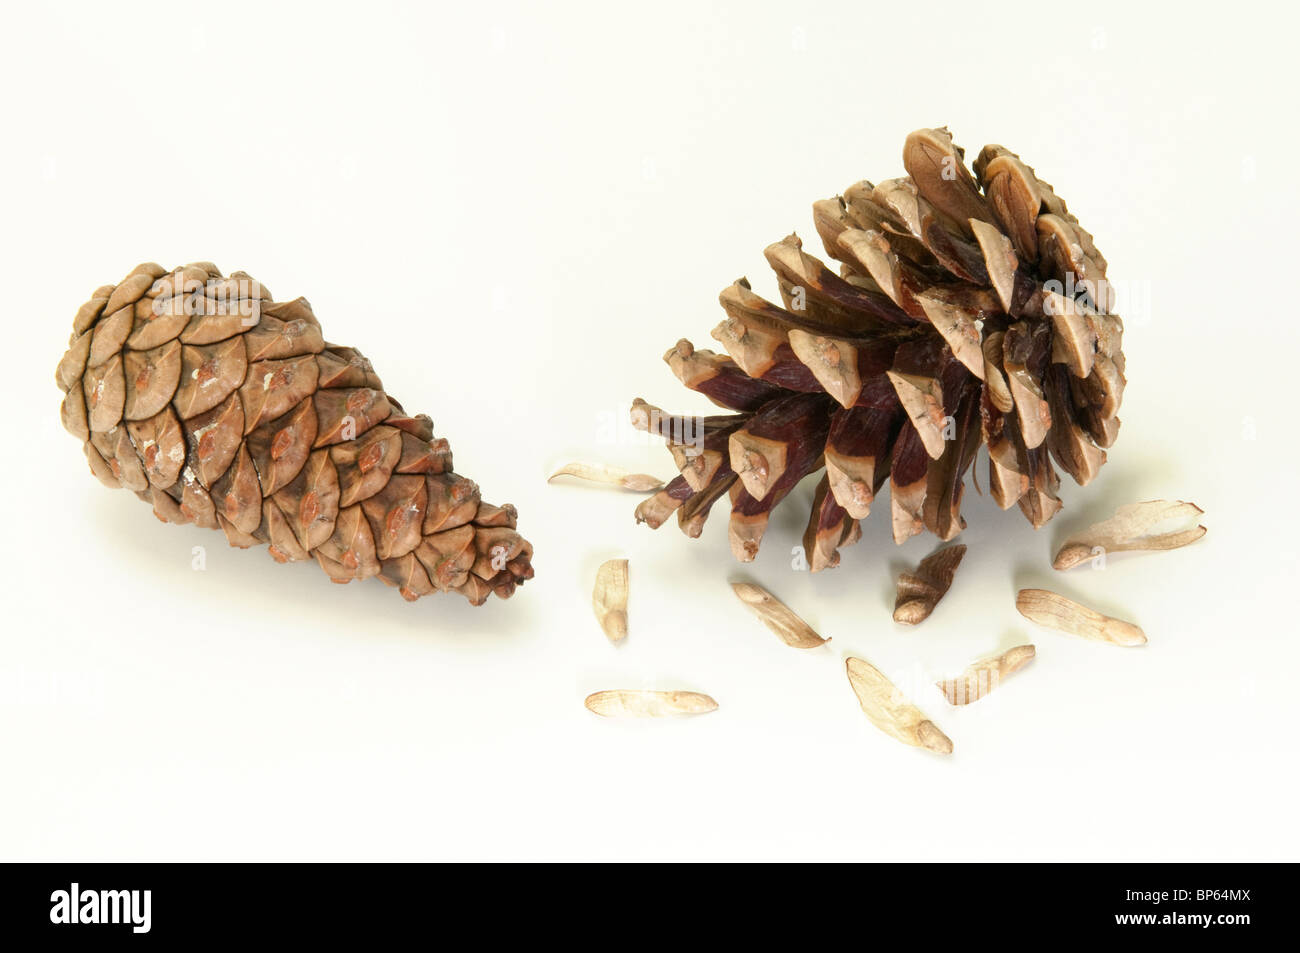 Austrian Pine, Black Pine, Corsican Pine (Pinus nigra). Two cones: A dry one with open scales and a moist one with closed ones. Stock Photo